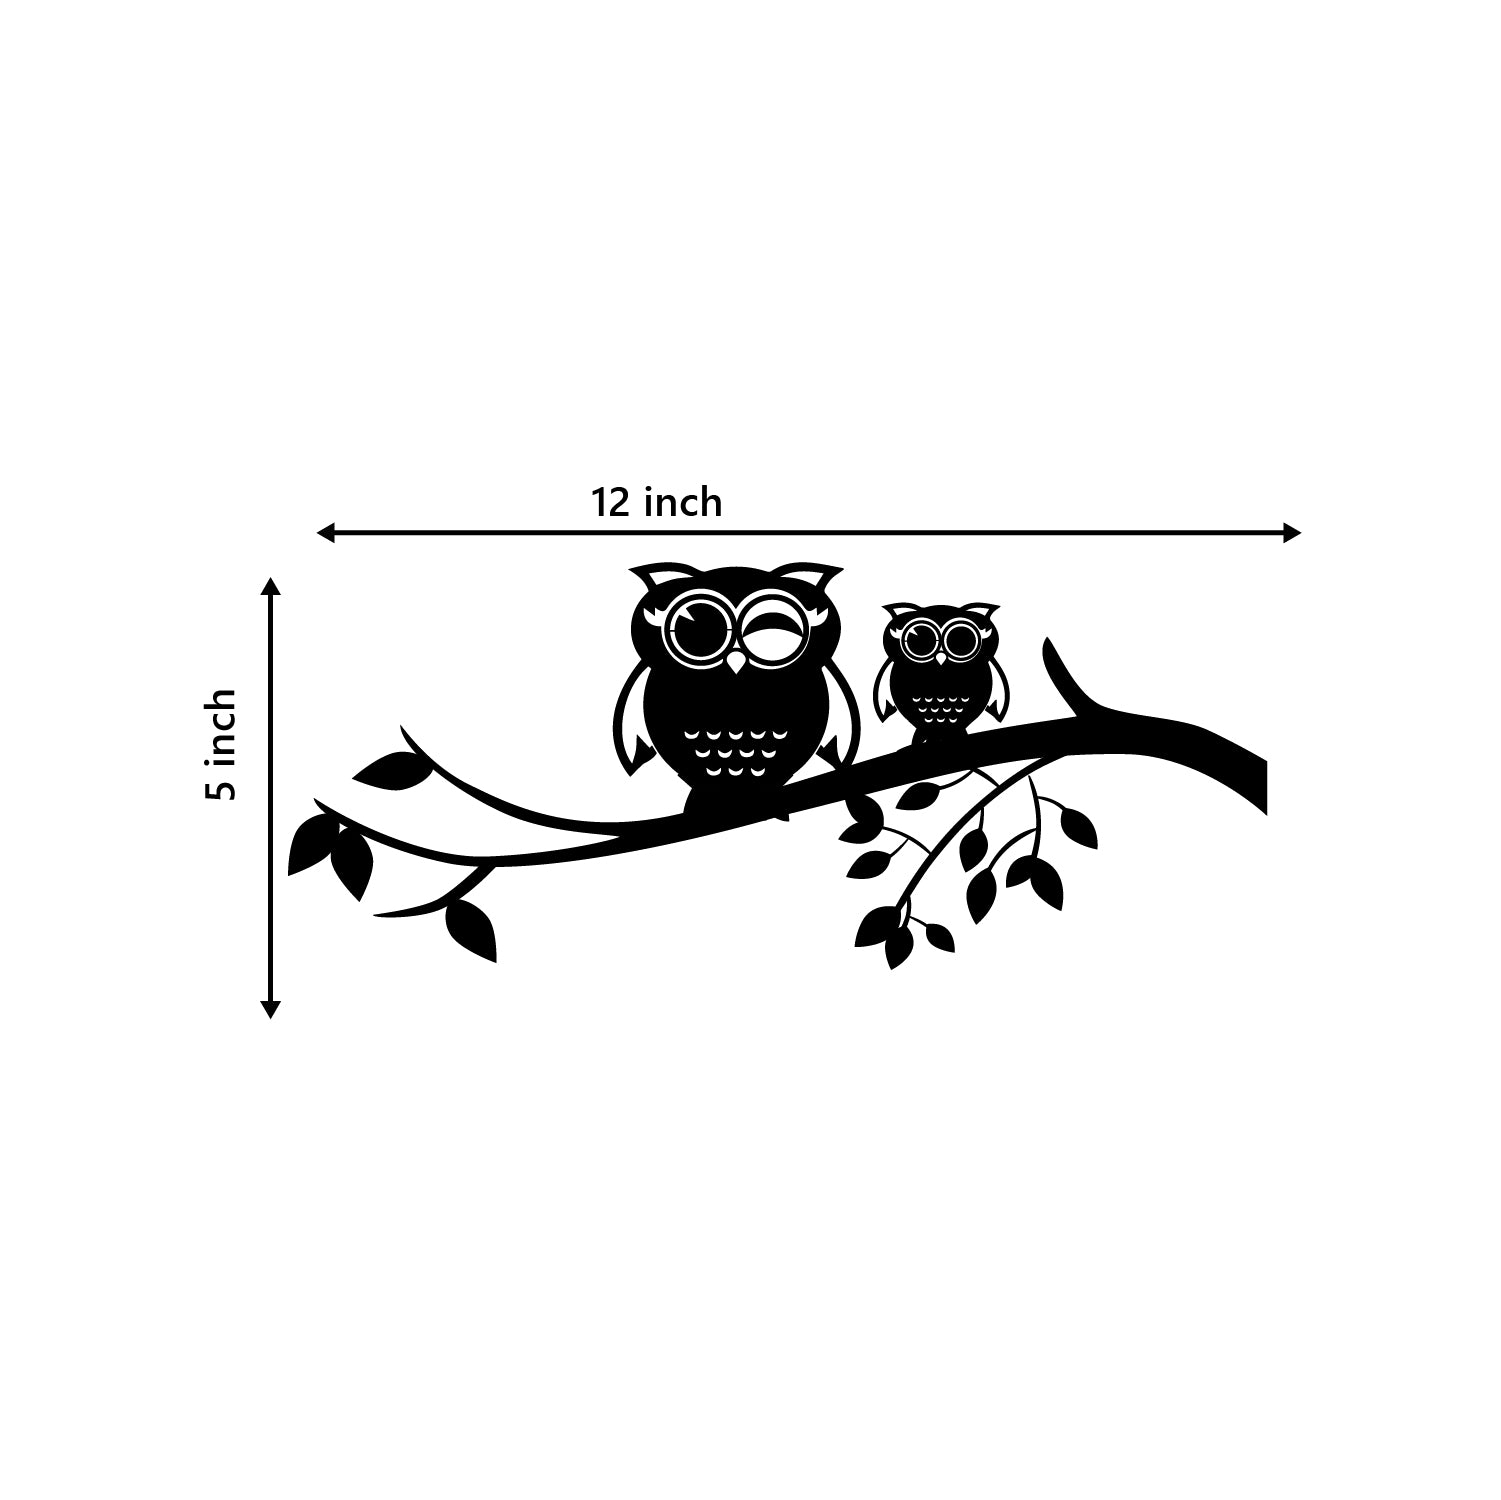 2 Owls On A Tree Branch Black Engineered Wood Wall Art Cutout, Ready To Hang Home Decor 2